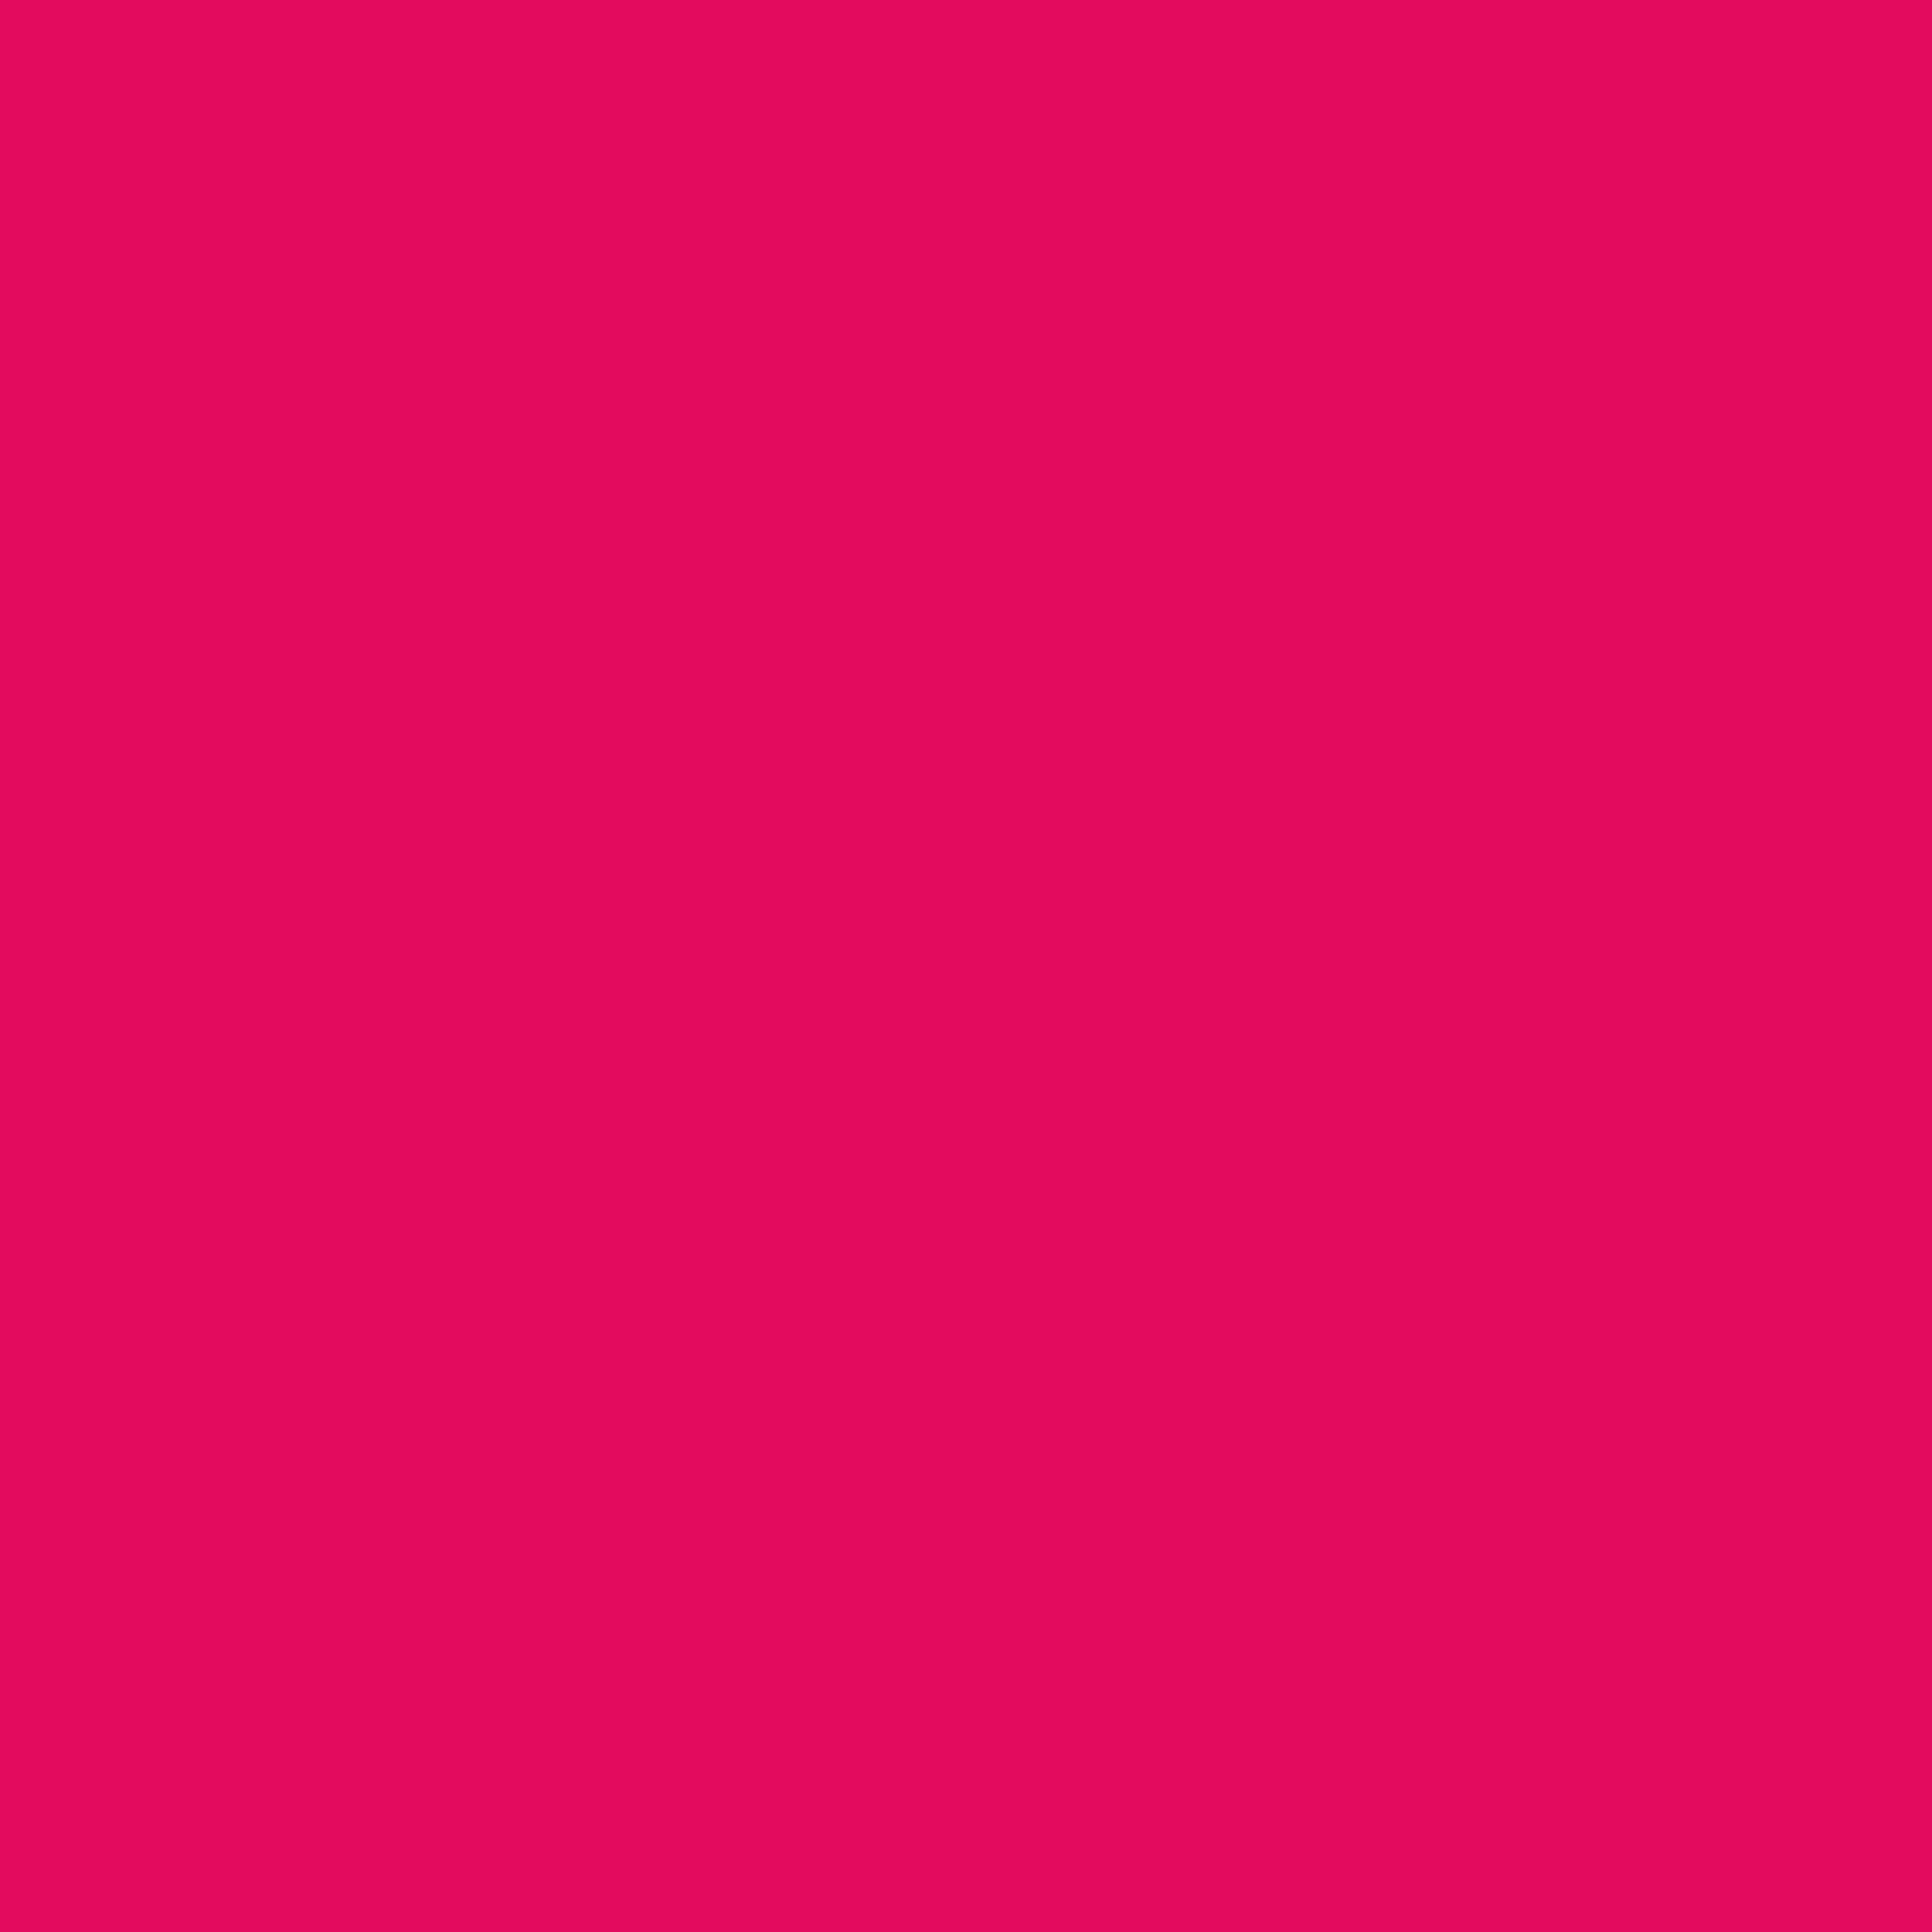 2732x2732 Raspberry Solid Color Background